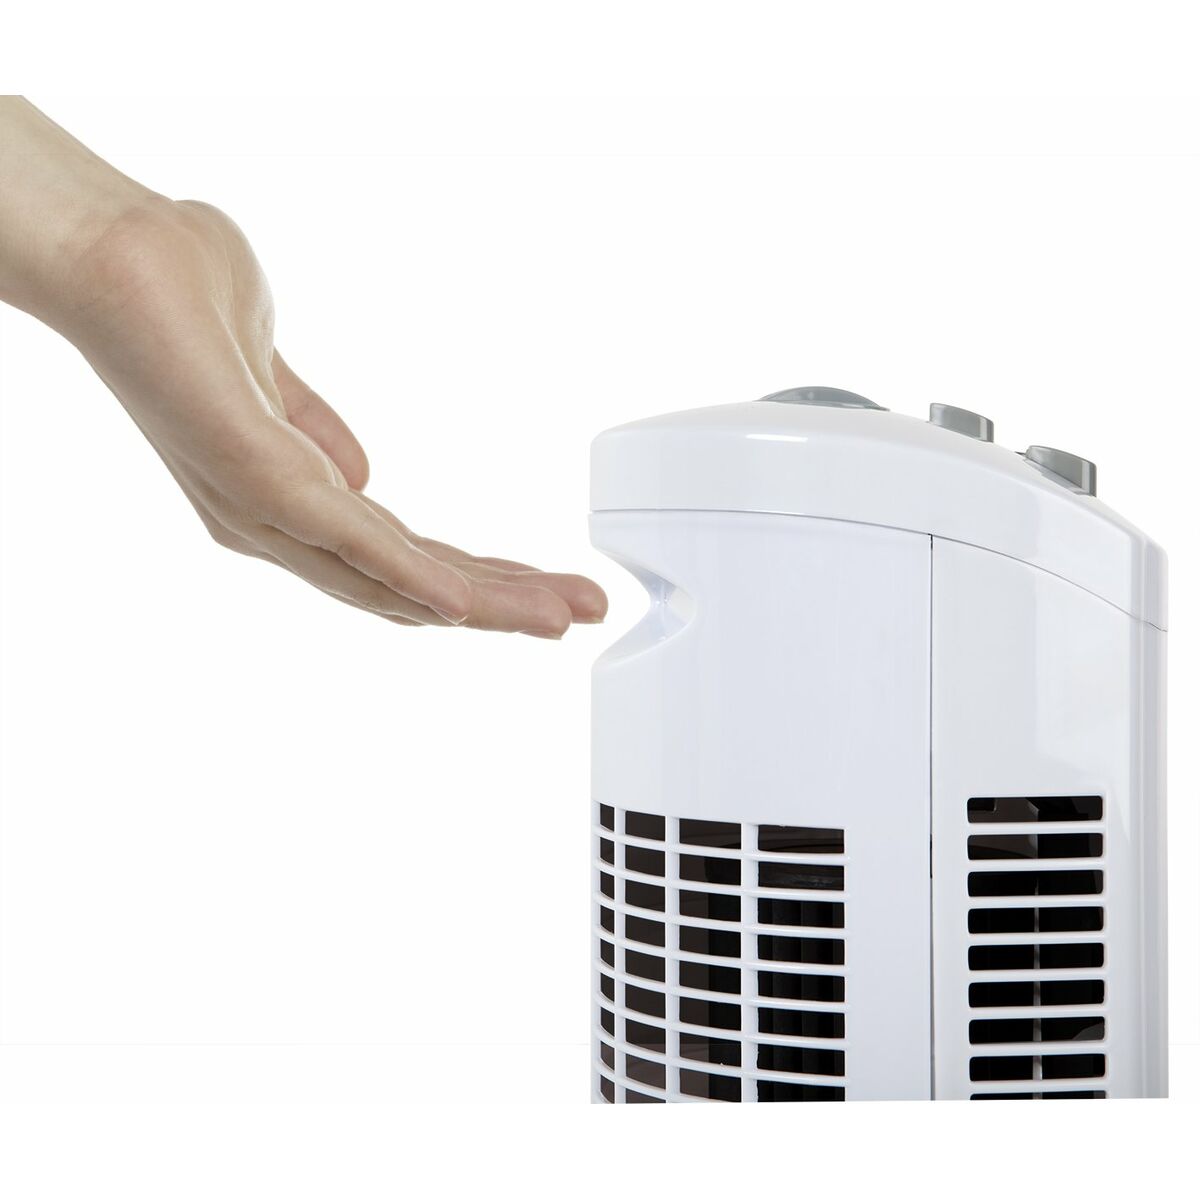 Tower Fan Orbegozo TW0745 White, Orbegozo, Home and cooking, Portable air conditioning, tower-fan-orbegozo-tw0745-white, Brand_Orbegozo, category-reference-2399, category-reference-2450, category-reference-2451, category-reference-t-19656, category-reference-t-21087, category-reference-t-25217, Condition_NEW, ferretería, Price_50 - 100, summer, RiotNook